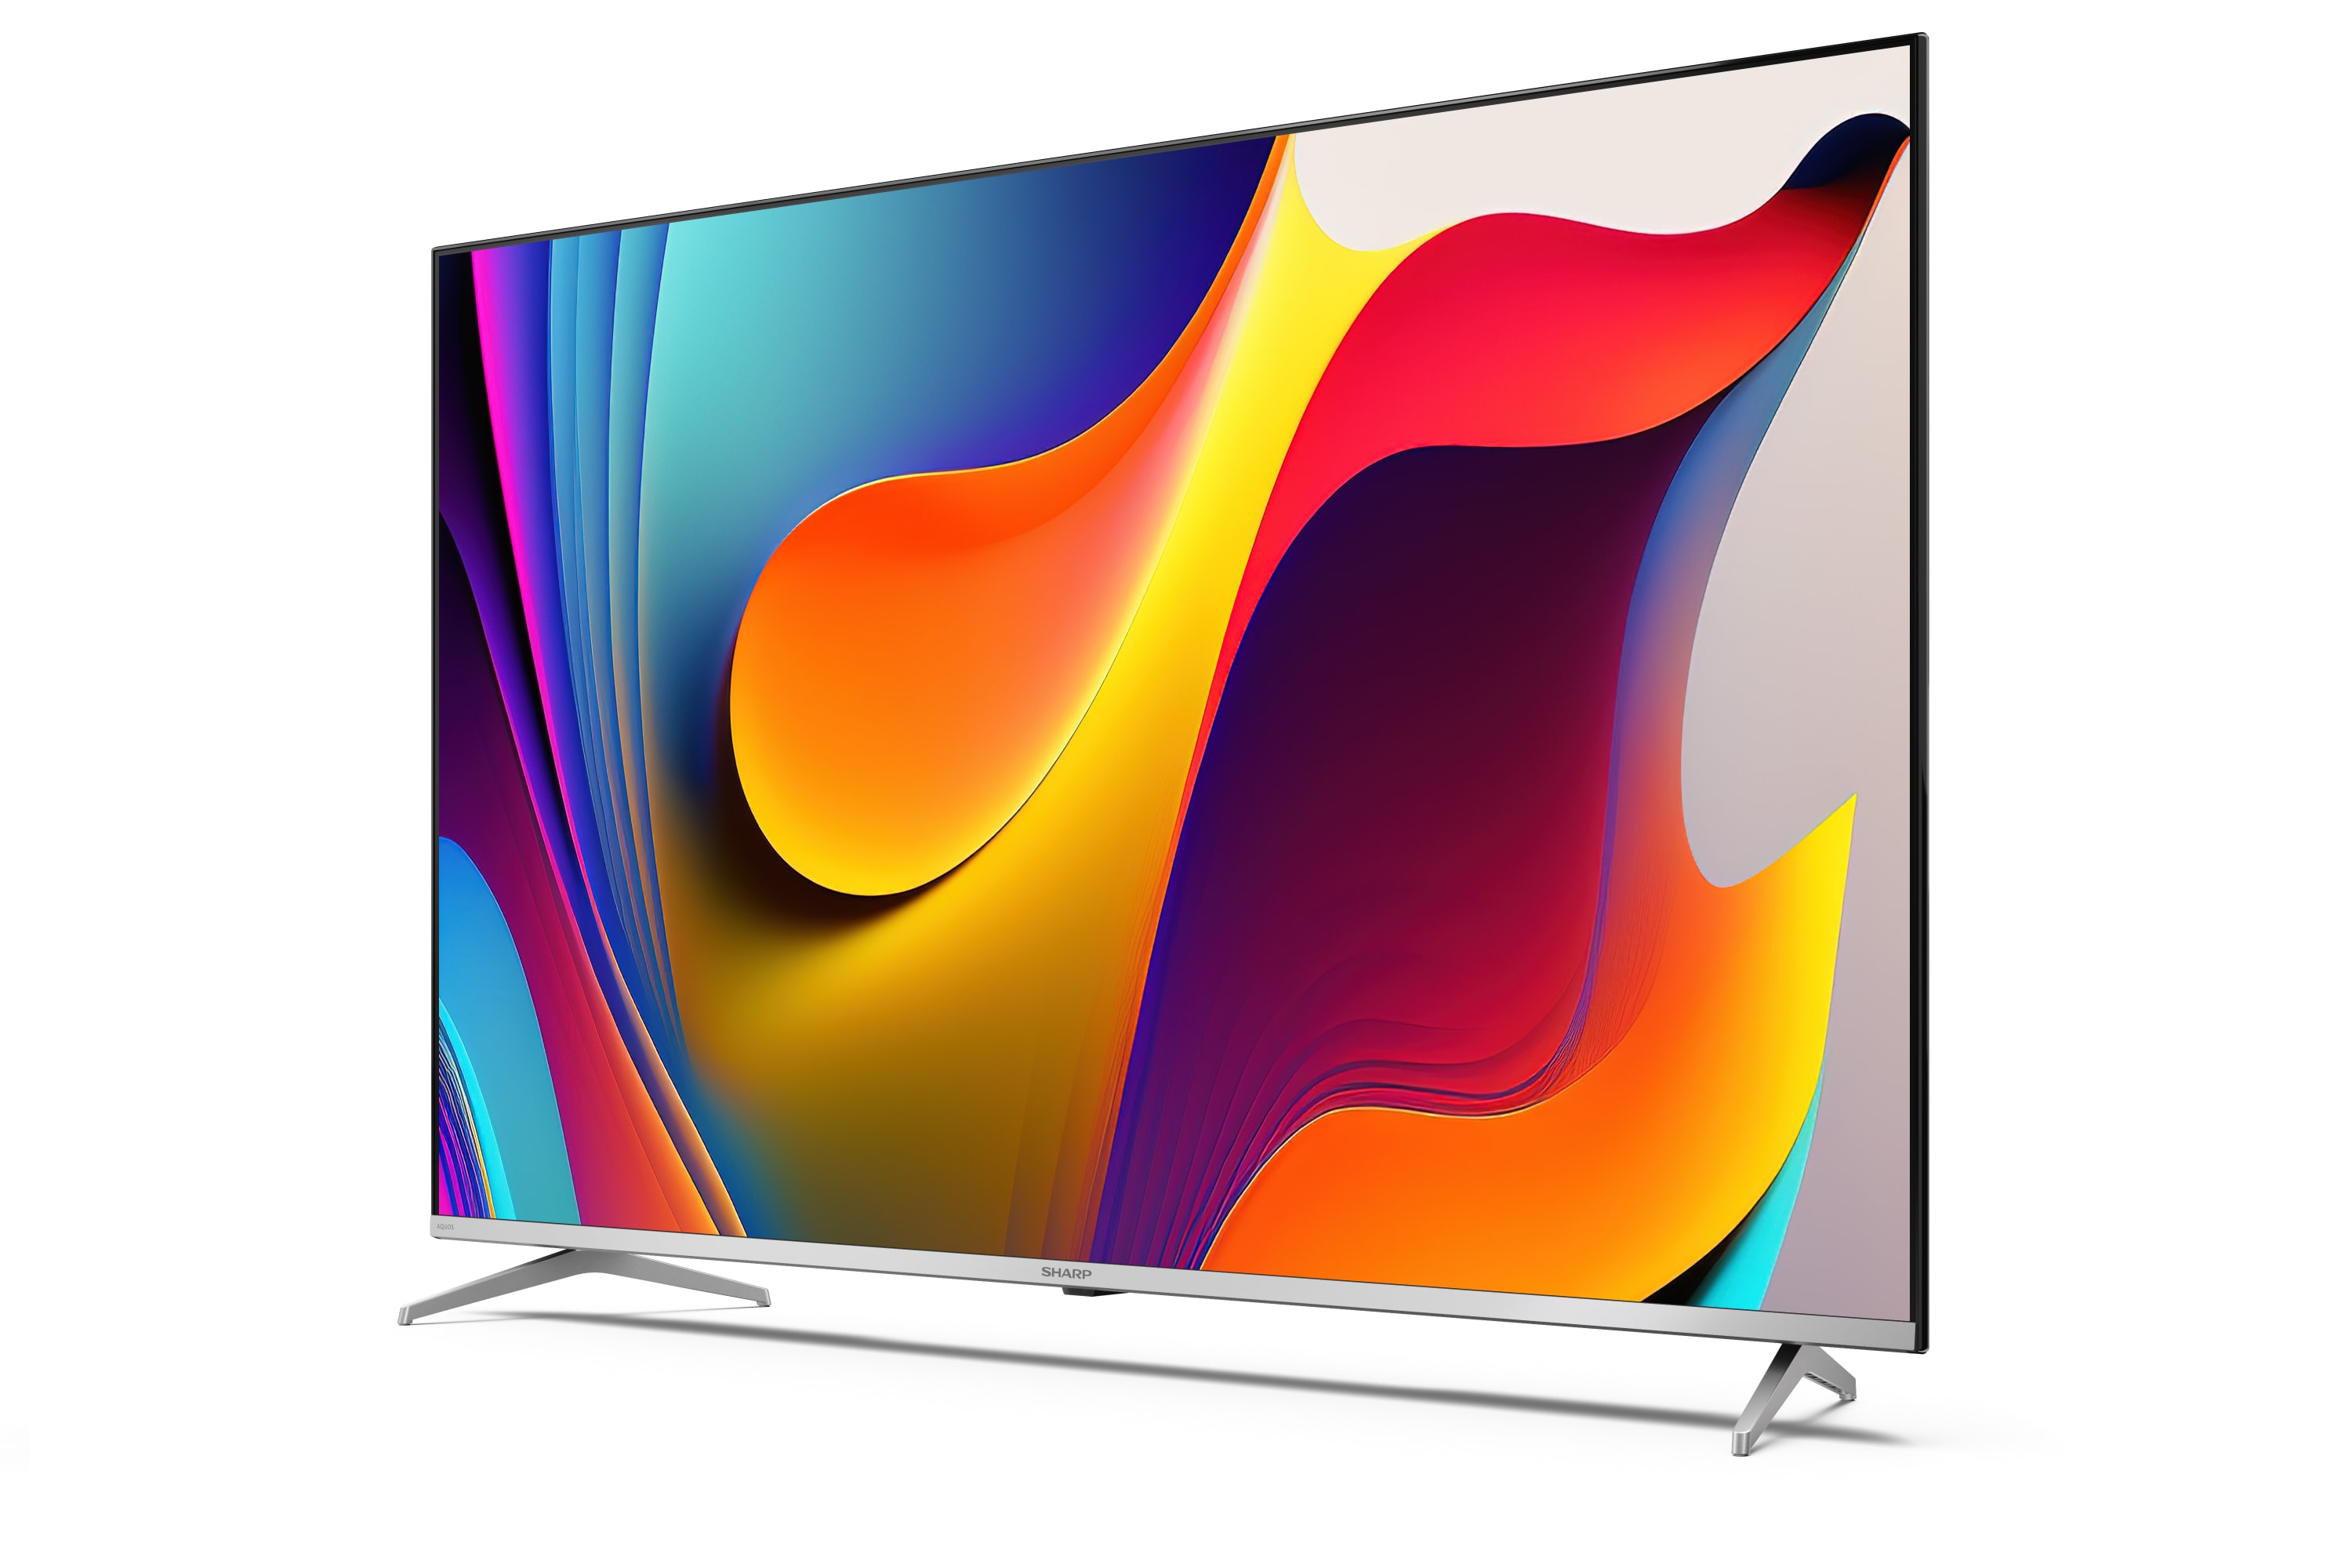 Android TV 4K UHD - 55" 4K ULTRA HD QUANTUM DOT SHARP ANDROID TV™